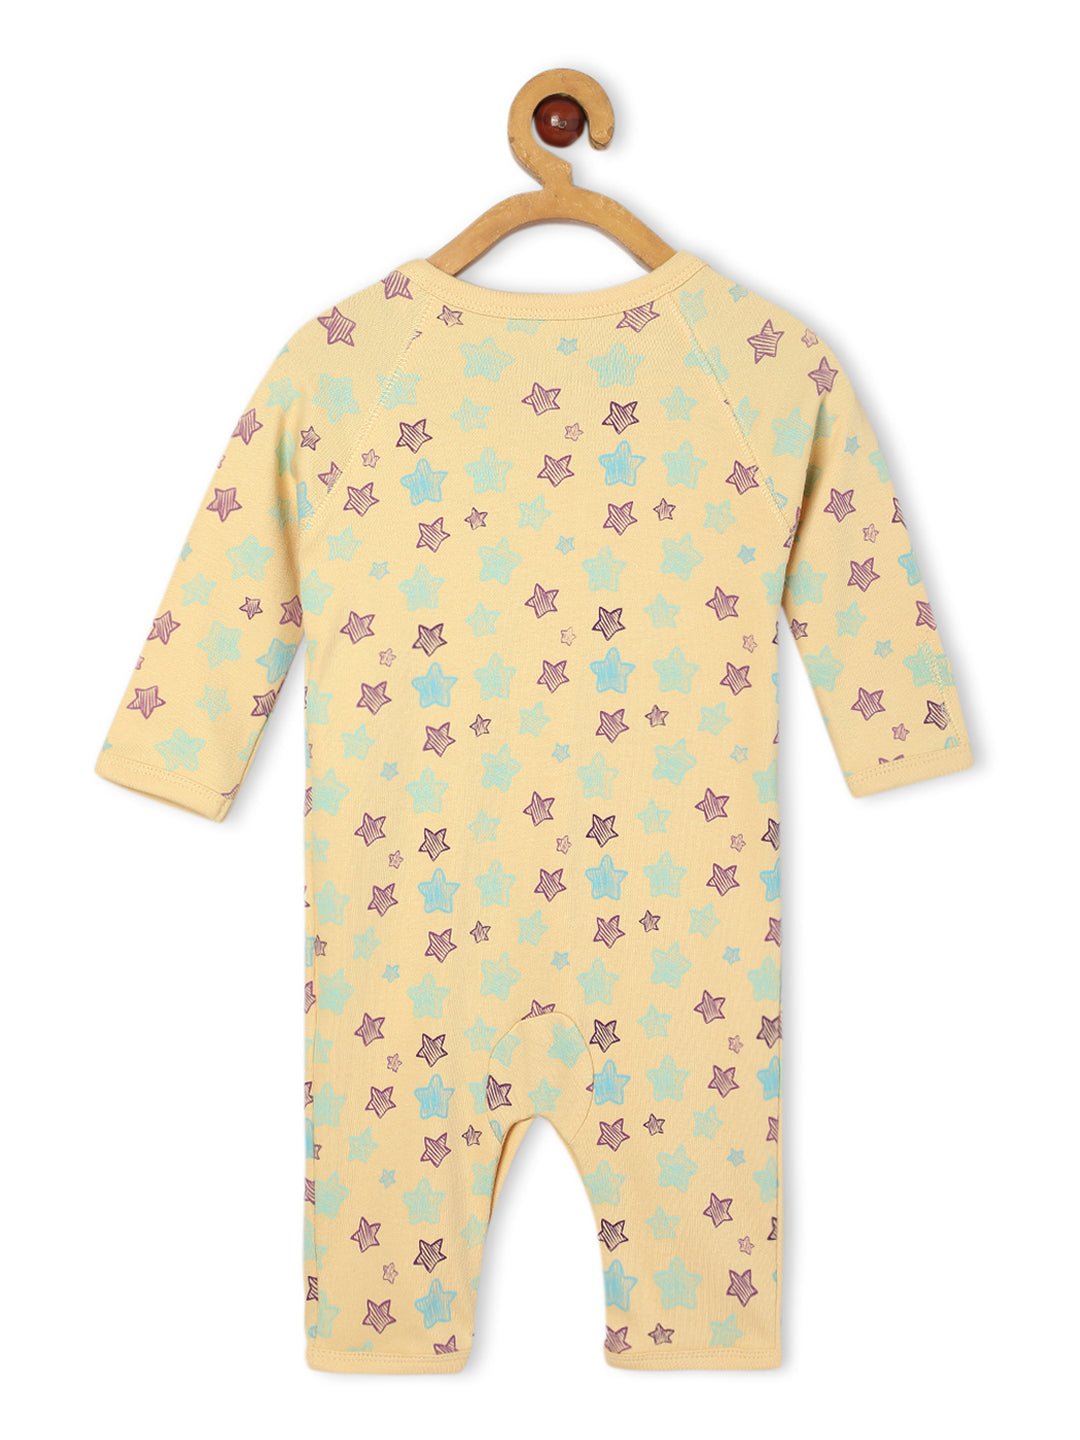 The Astros Infant Romper (Jabla Style)